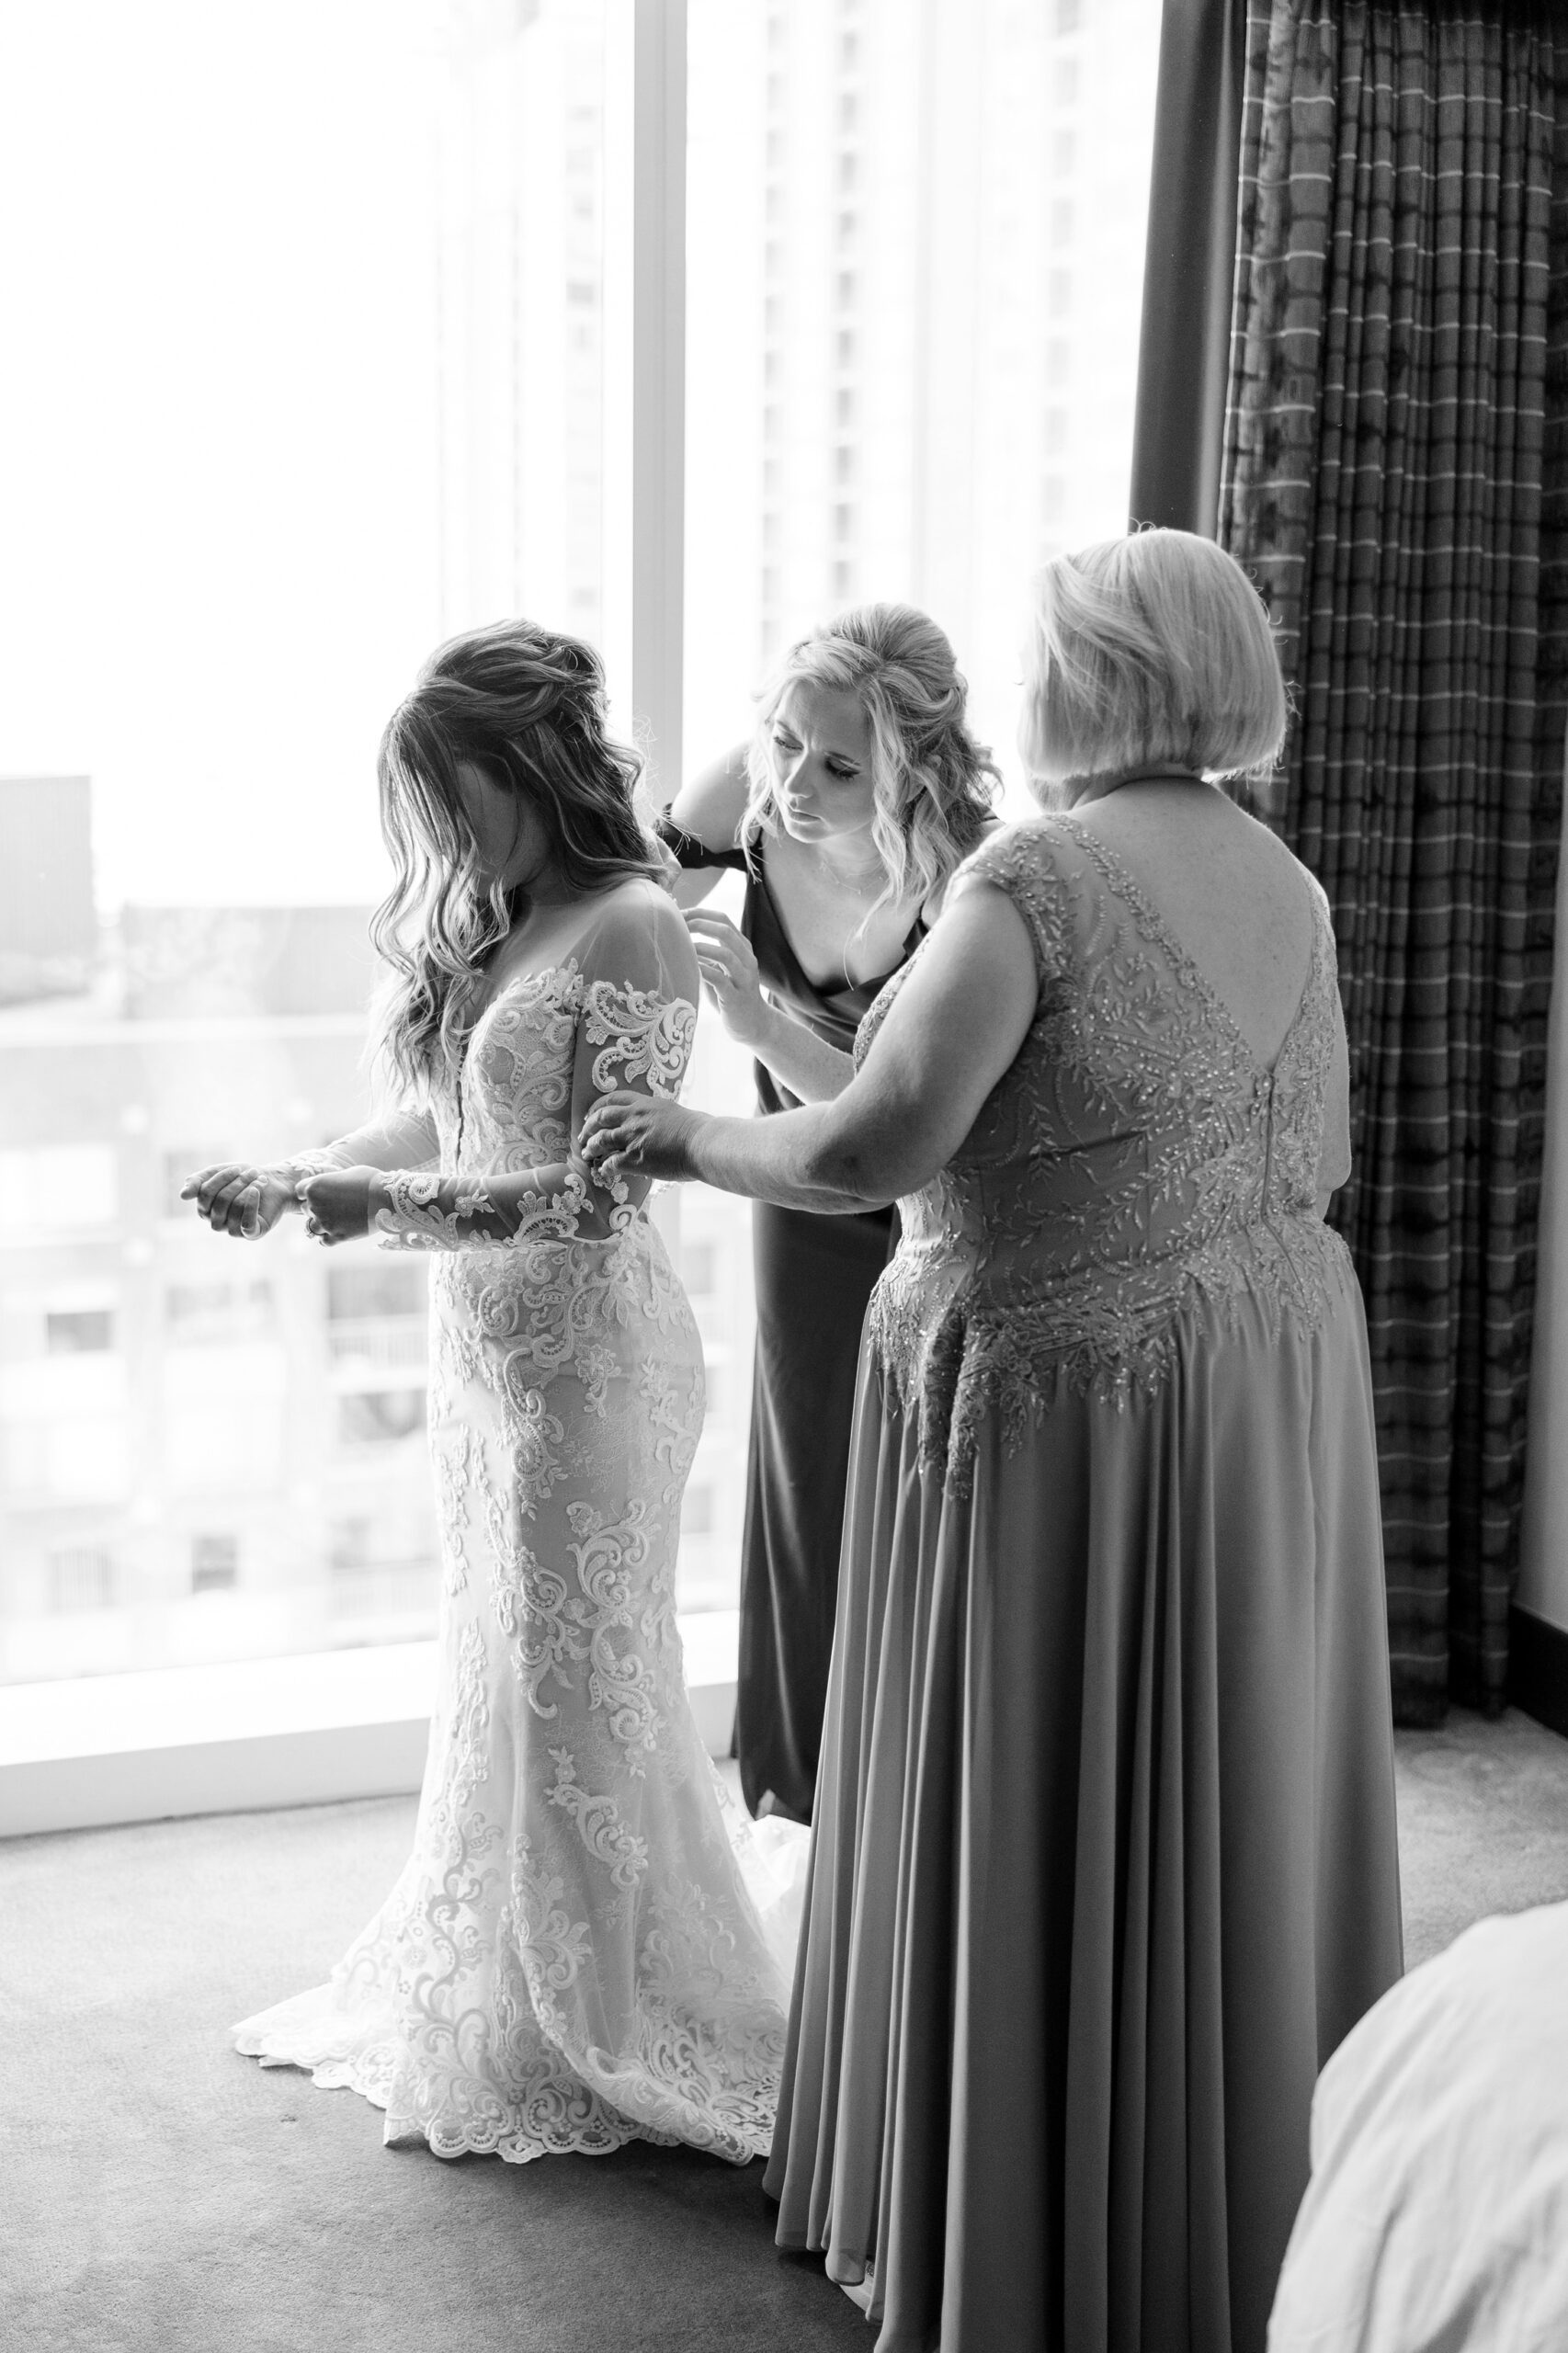 Mother of the bride helping bride into dress